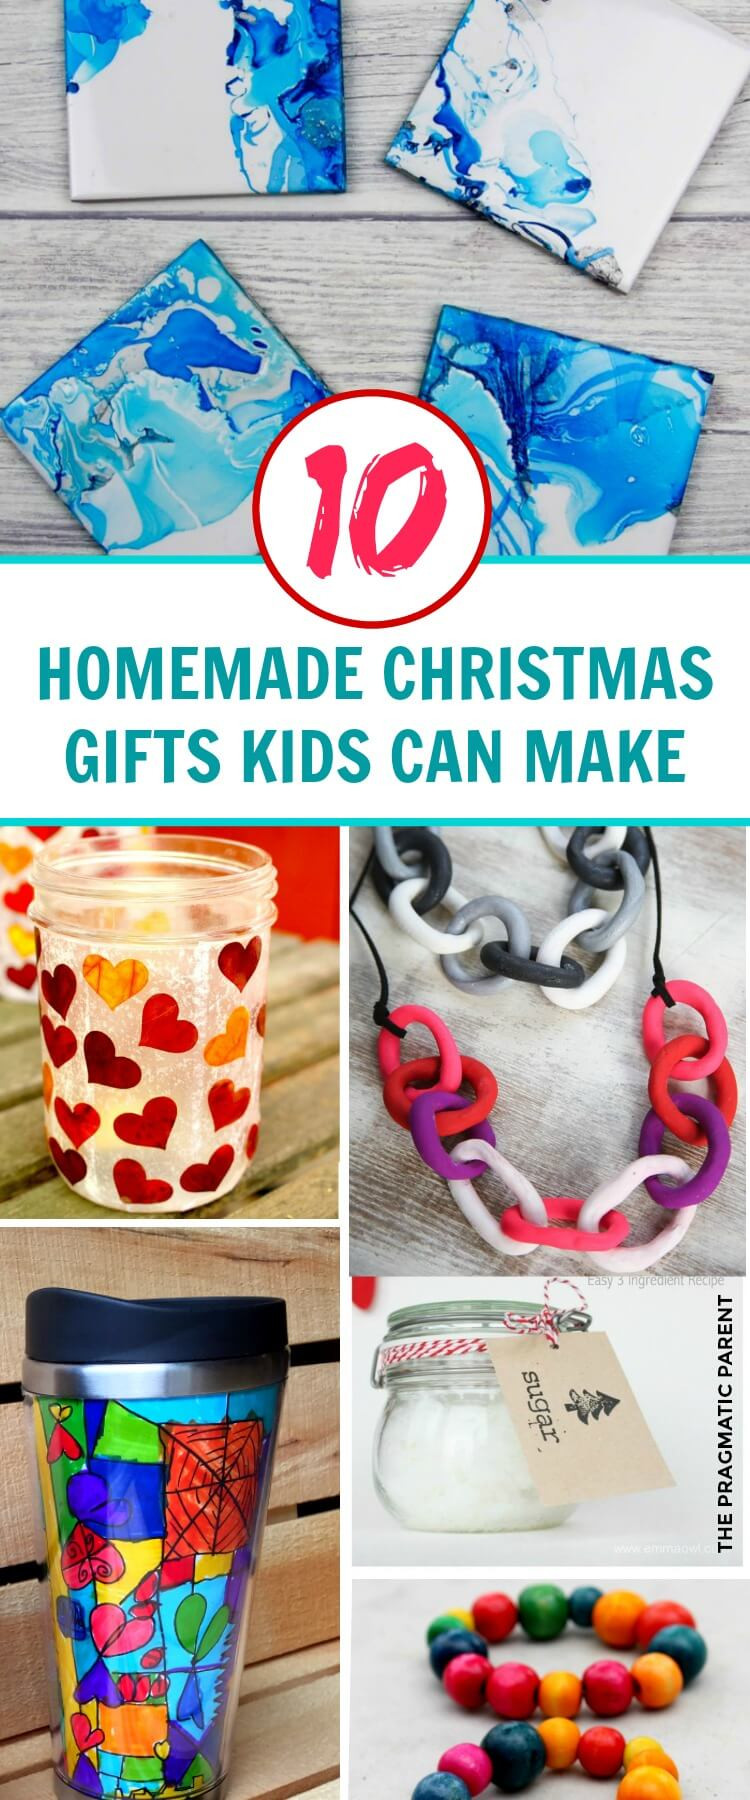 Homemade Gifts From Toddlers
 10 Beautiful Homemade Christmas Gifts Kids Can Make